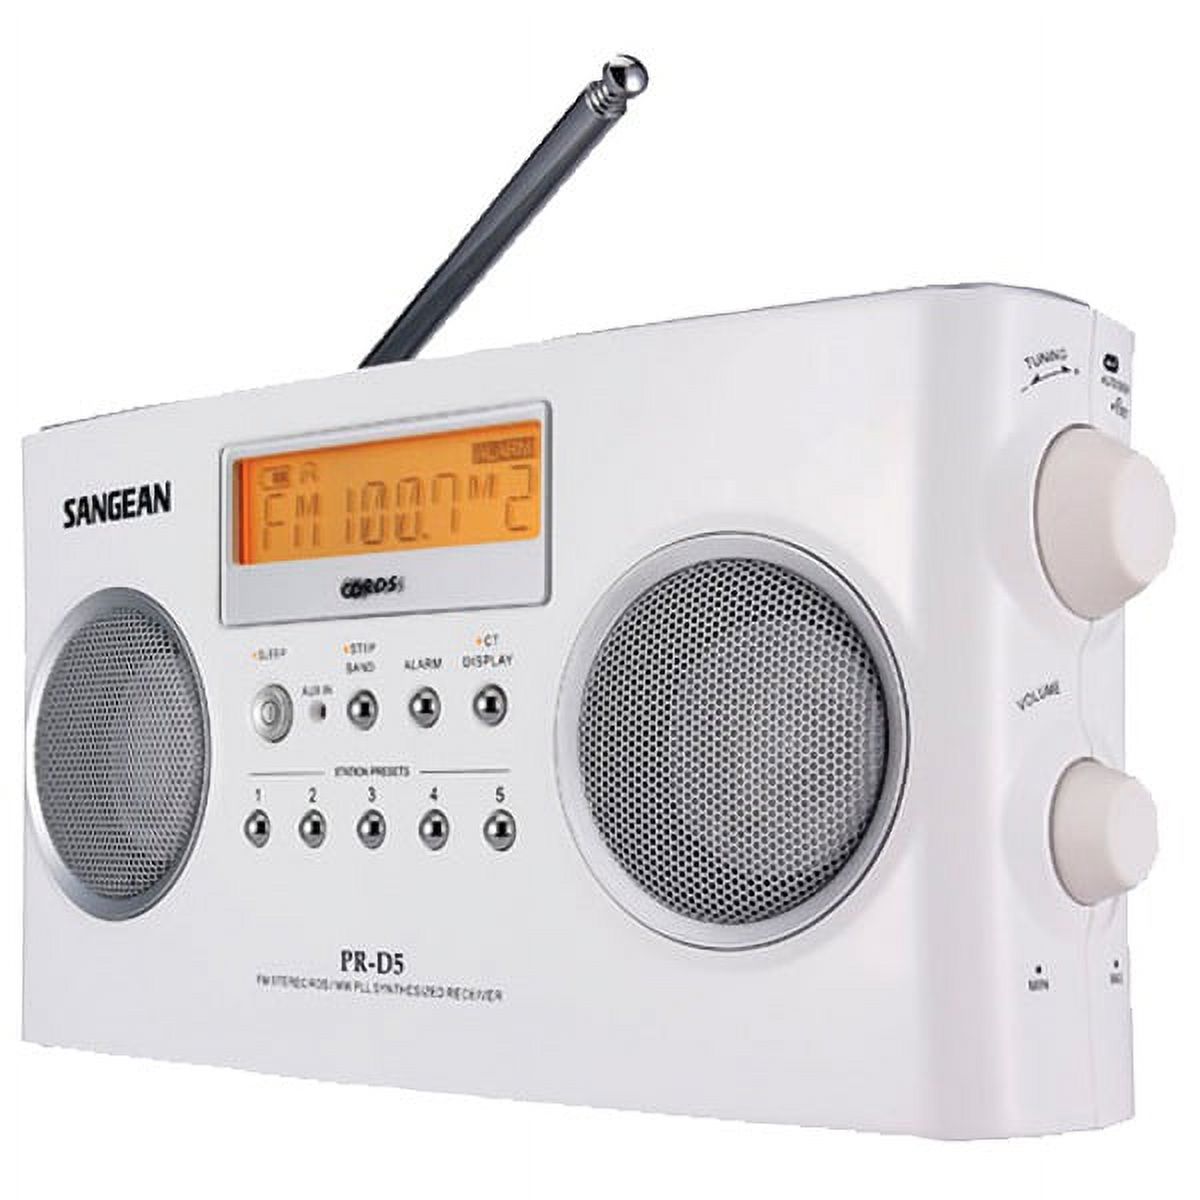 Digital Portable Stereo Receiver With Am/fm Radio (white) - image 1 of 1